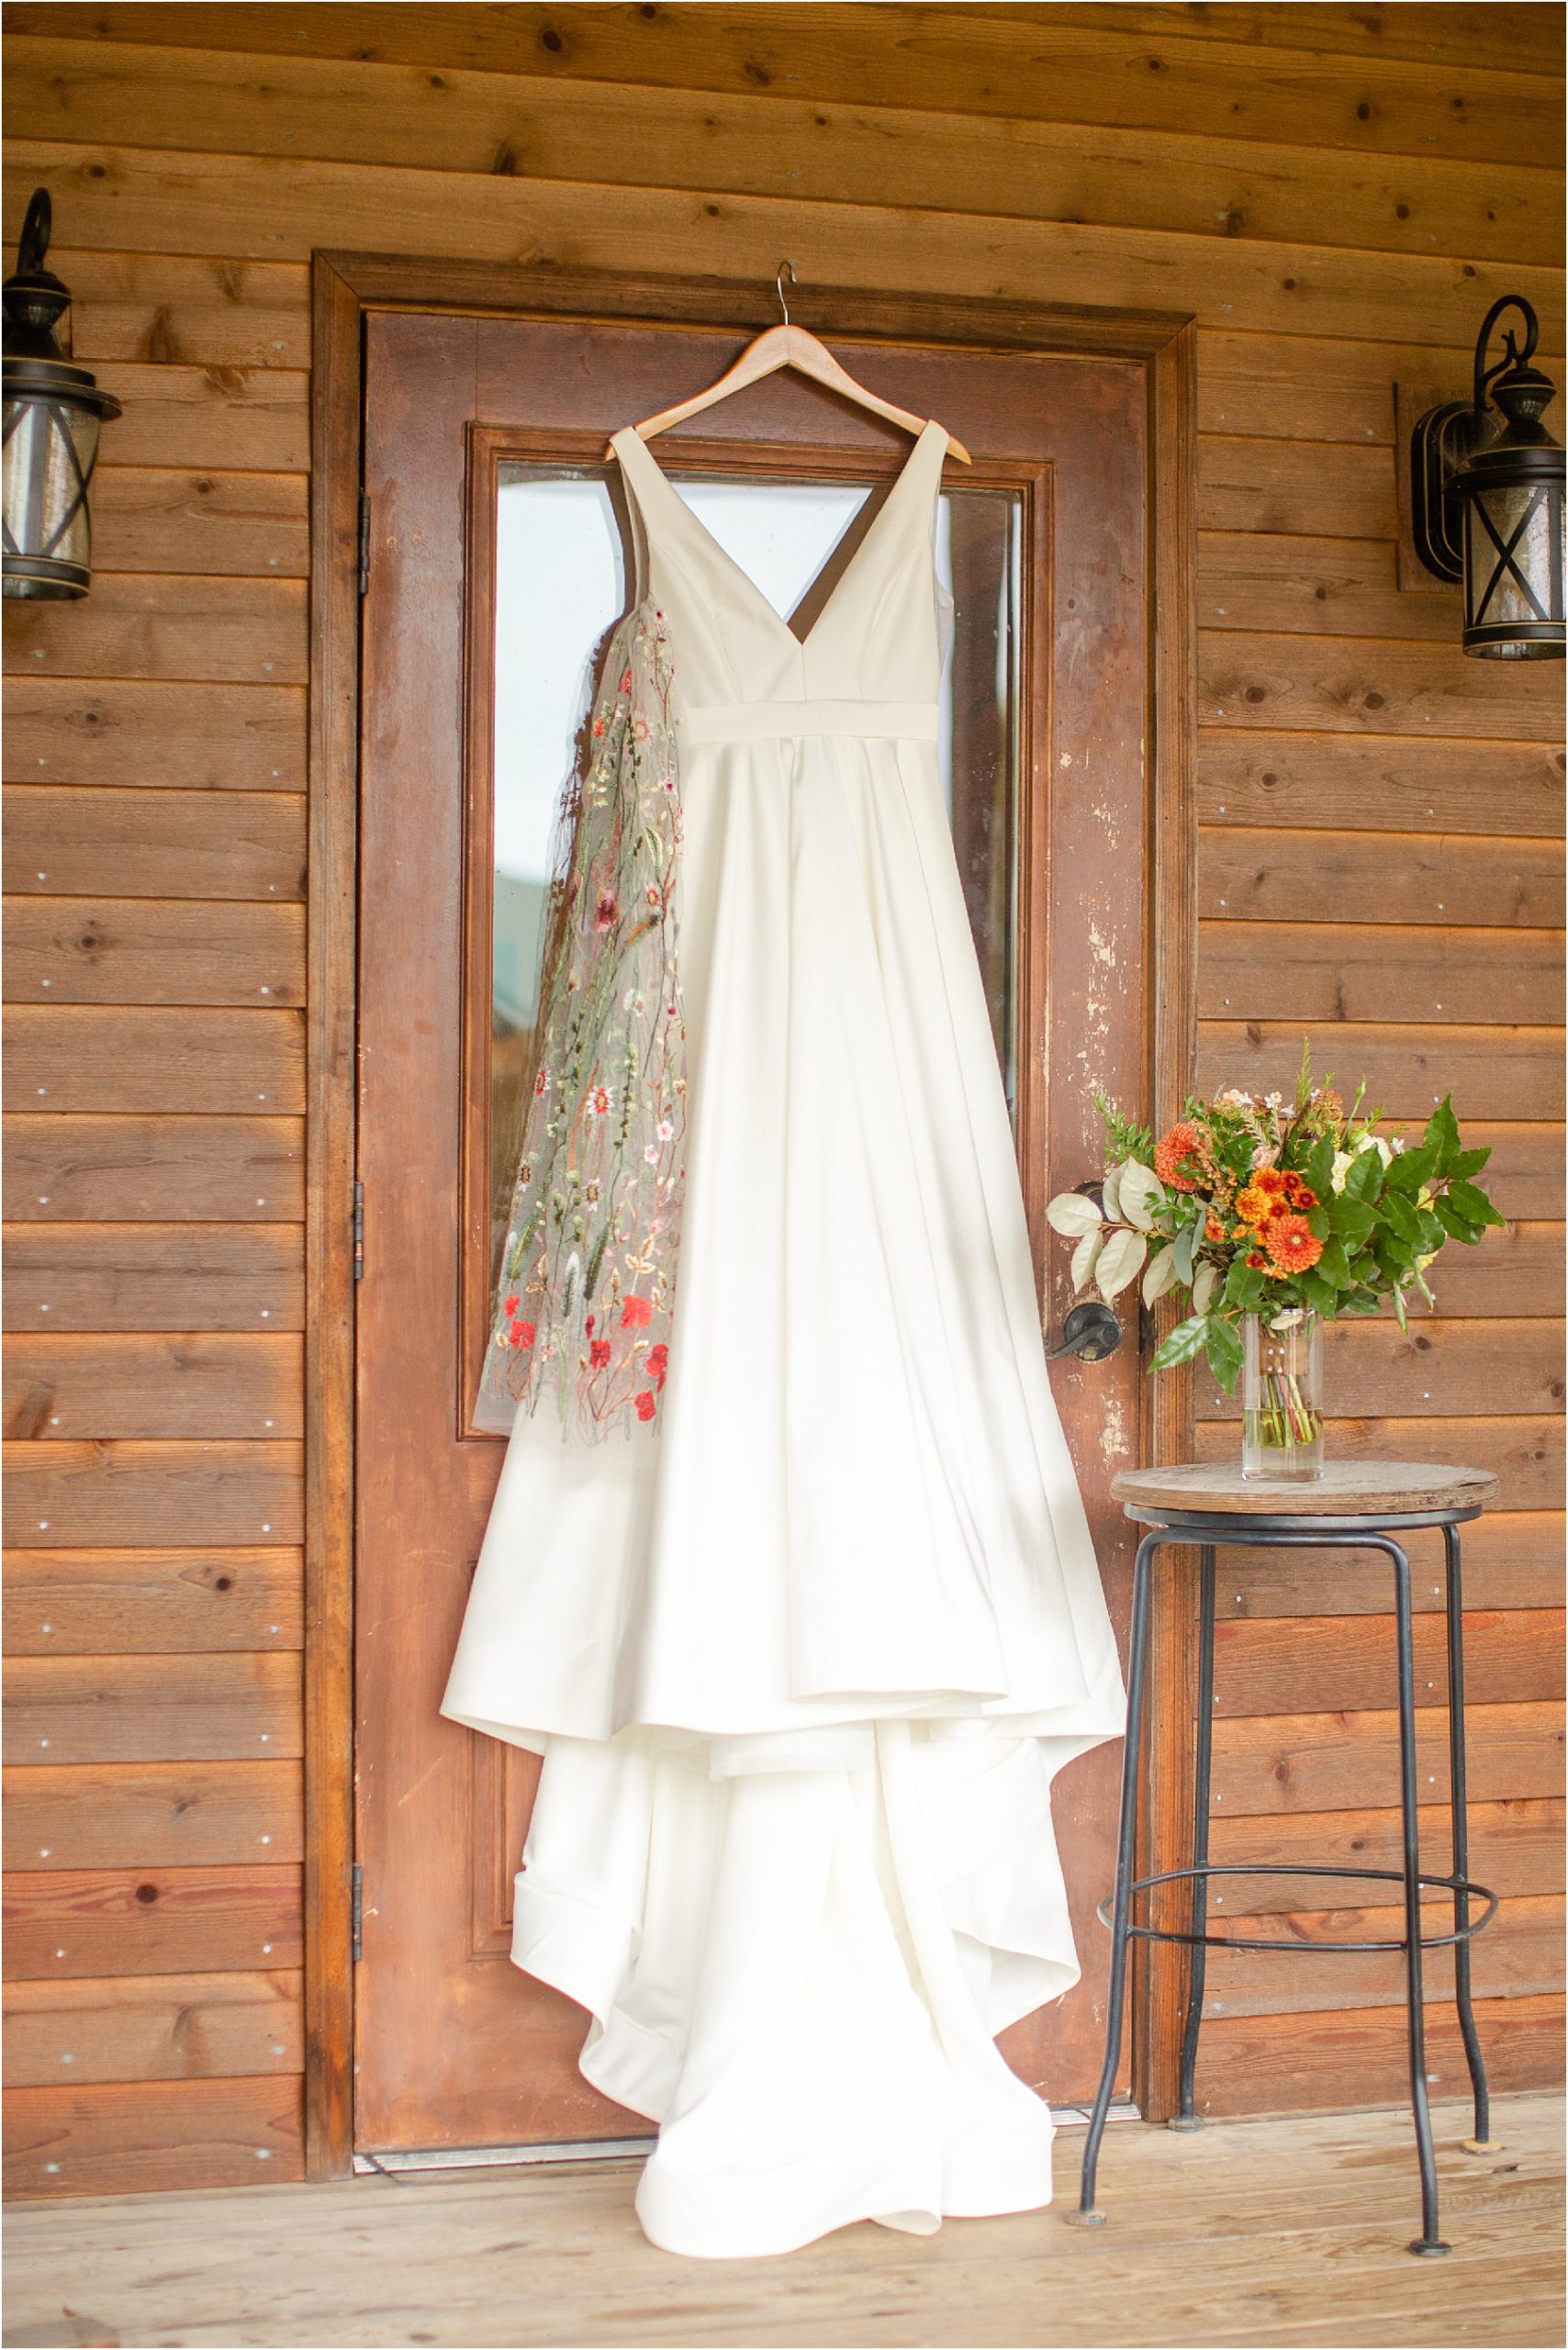 White wedding dress and floral veil hanging on barn wall in Greenville